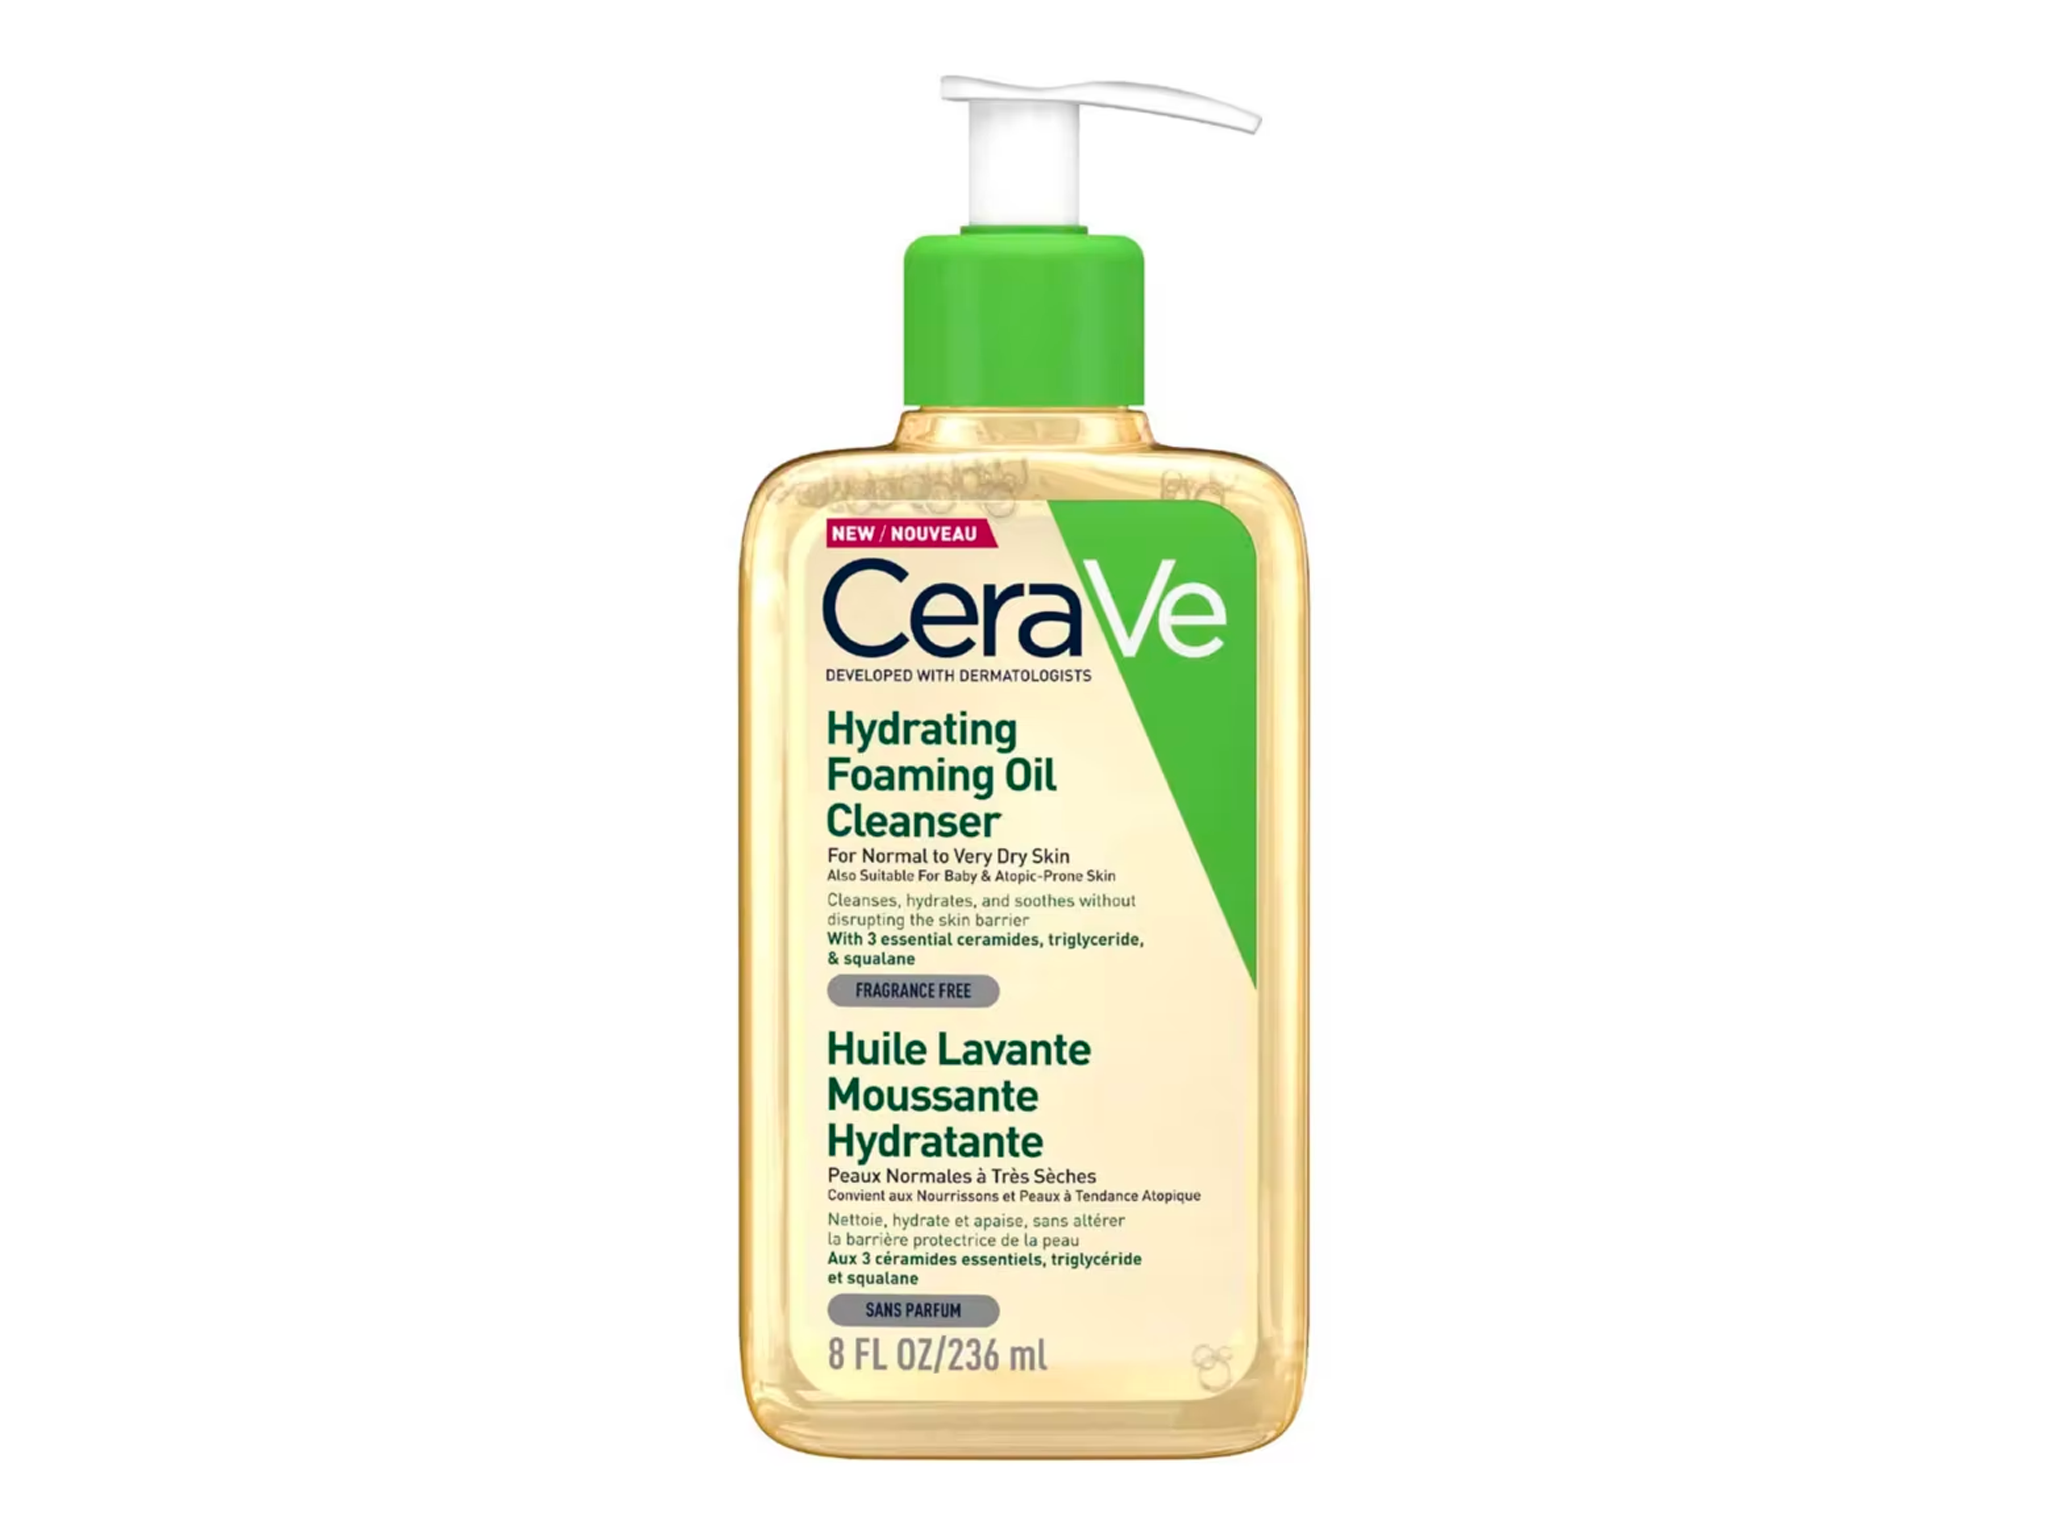 Foaming-oil-cleanser-indybest